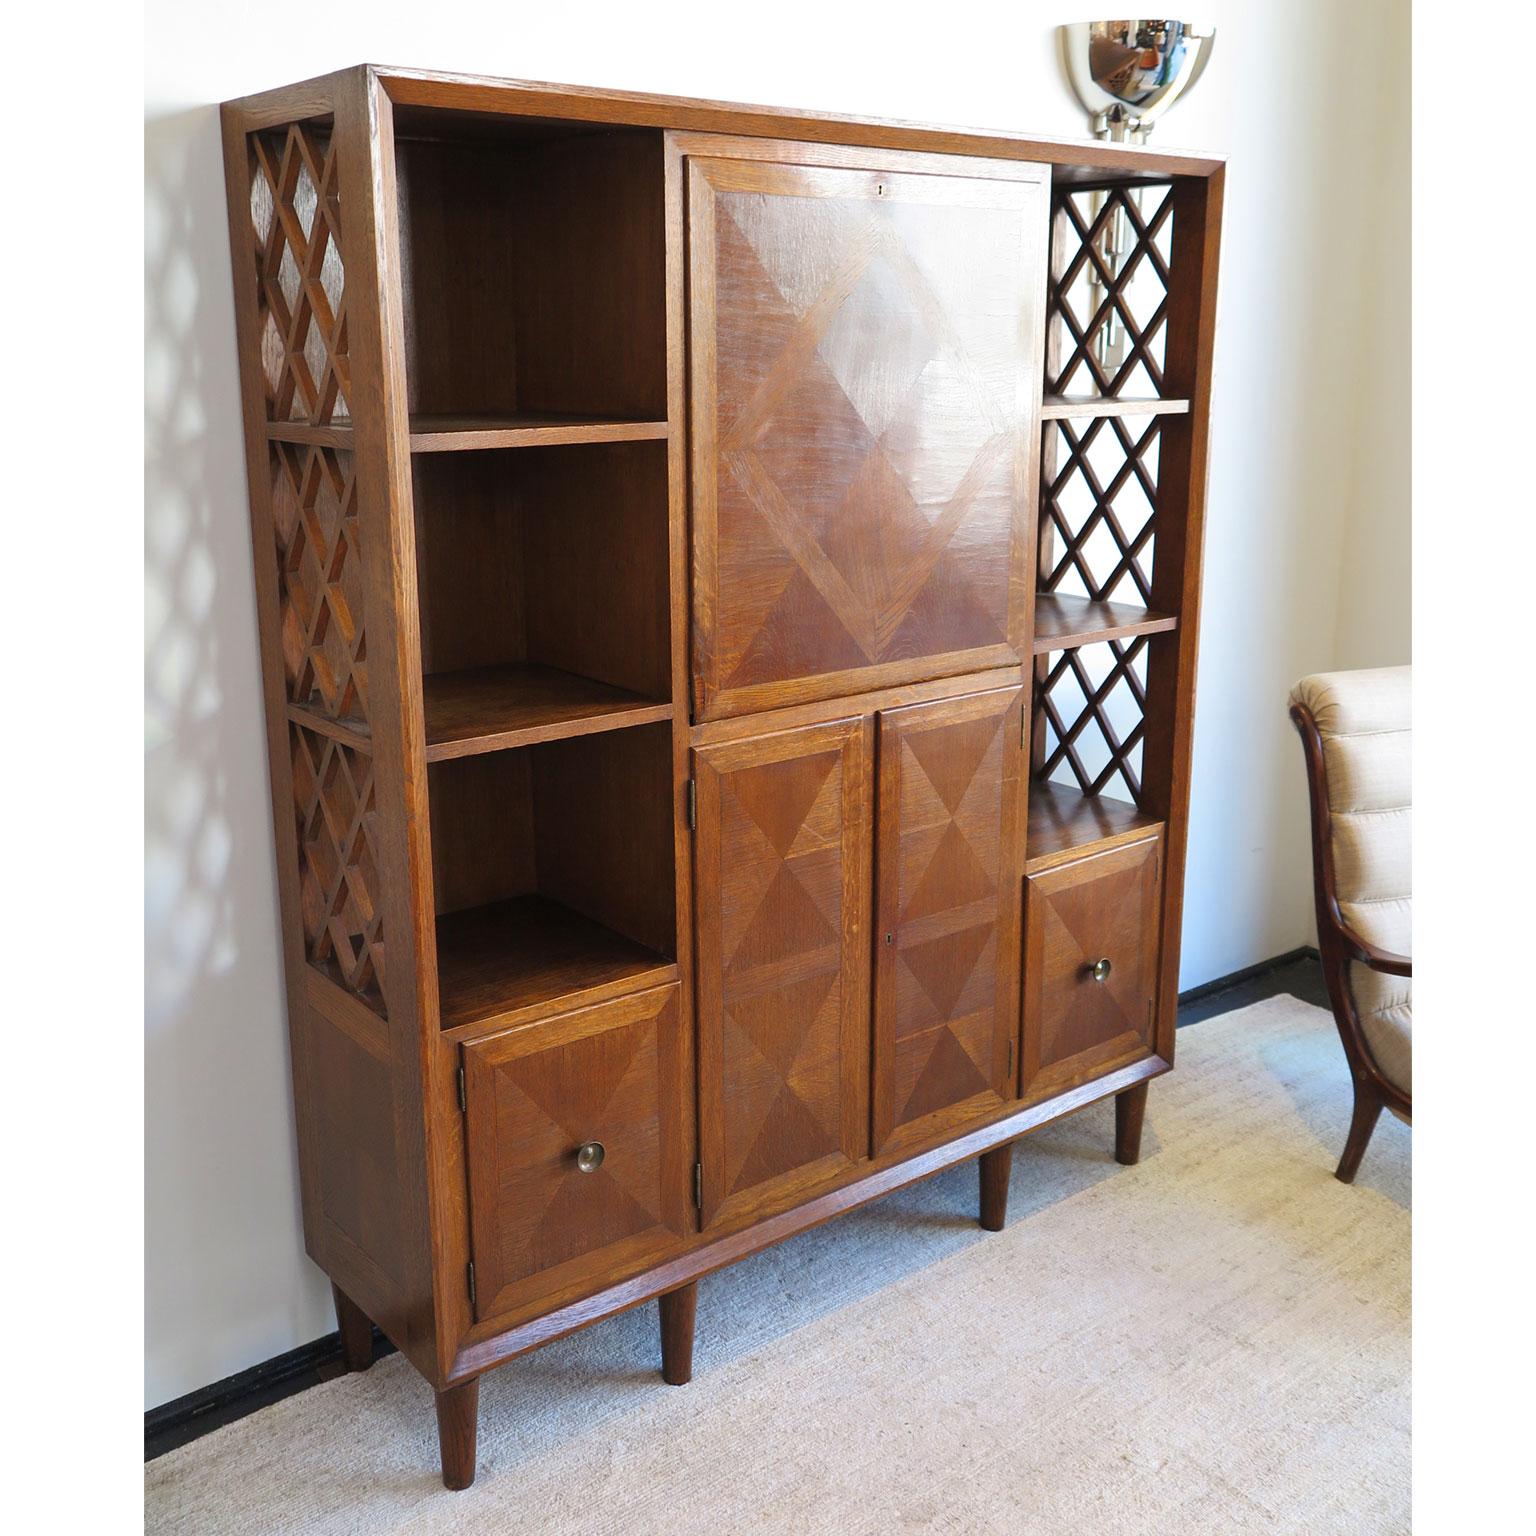 Midcentury Cabinet Arttributed to E. Lanzia, Italy, circa 1940s For Sale 1